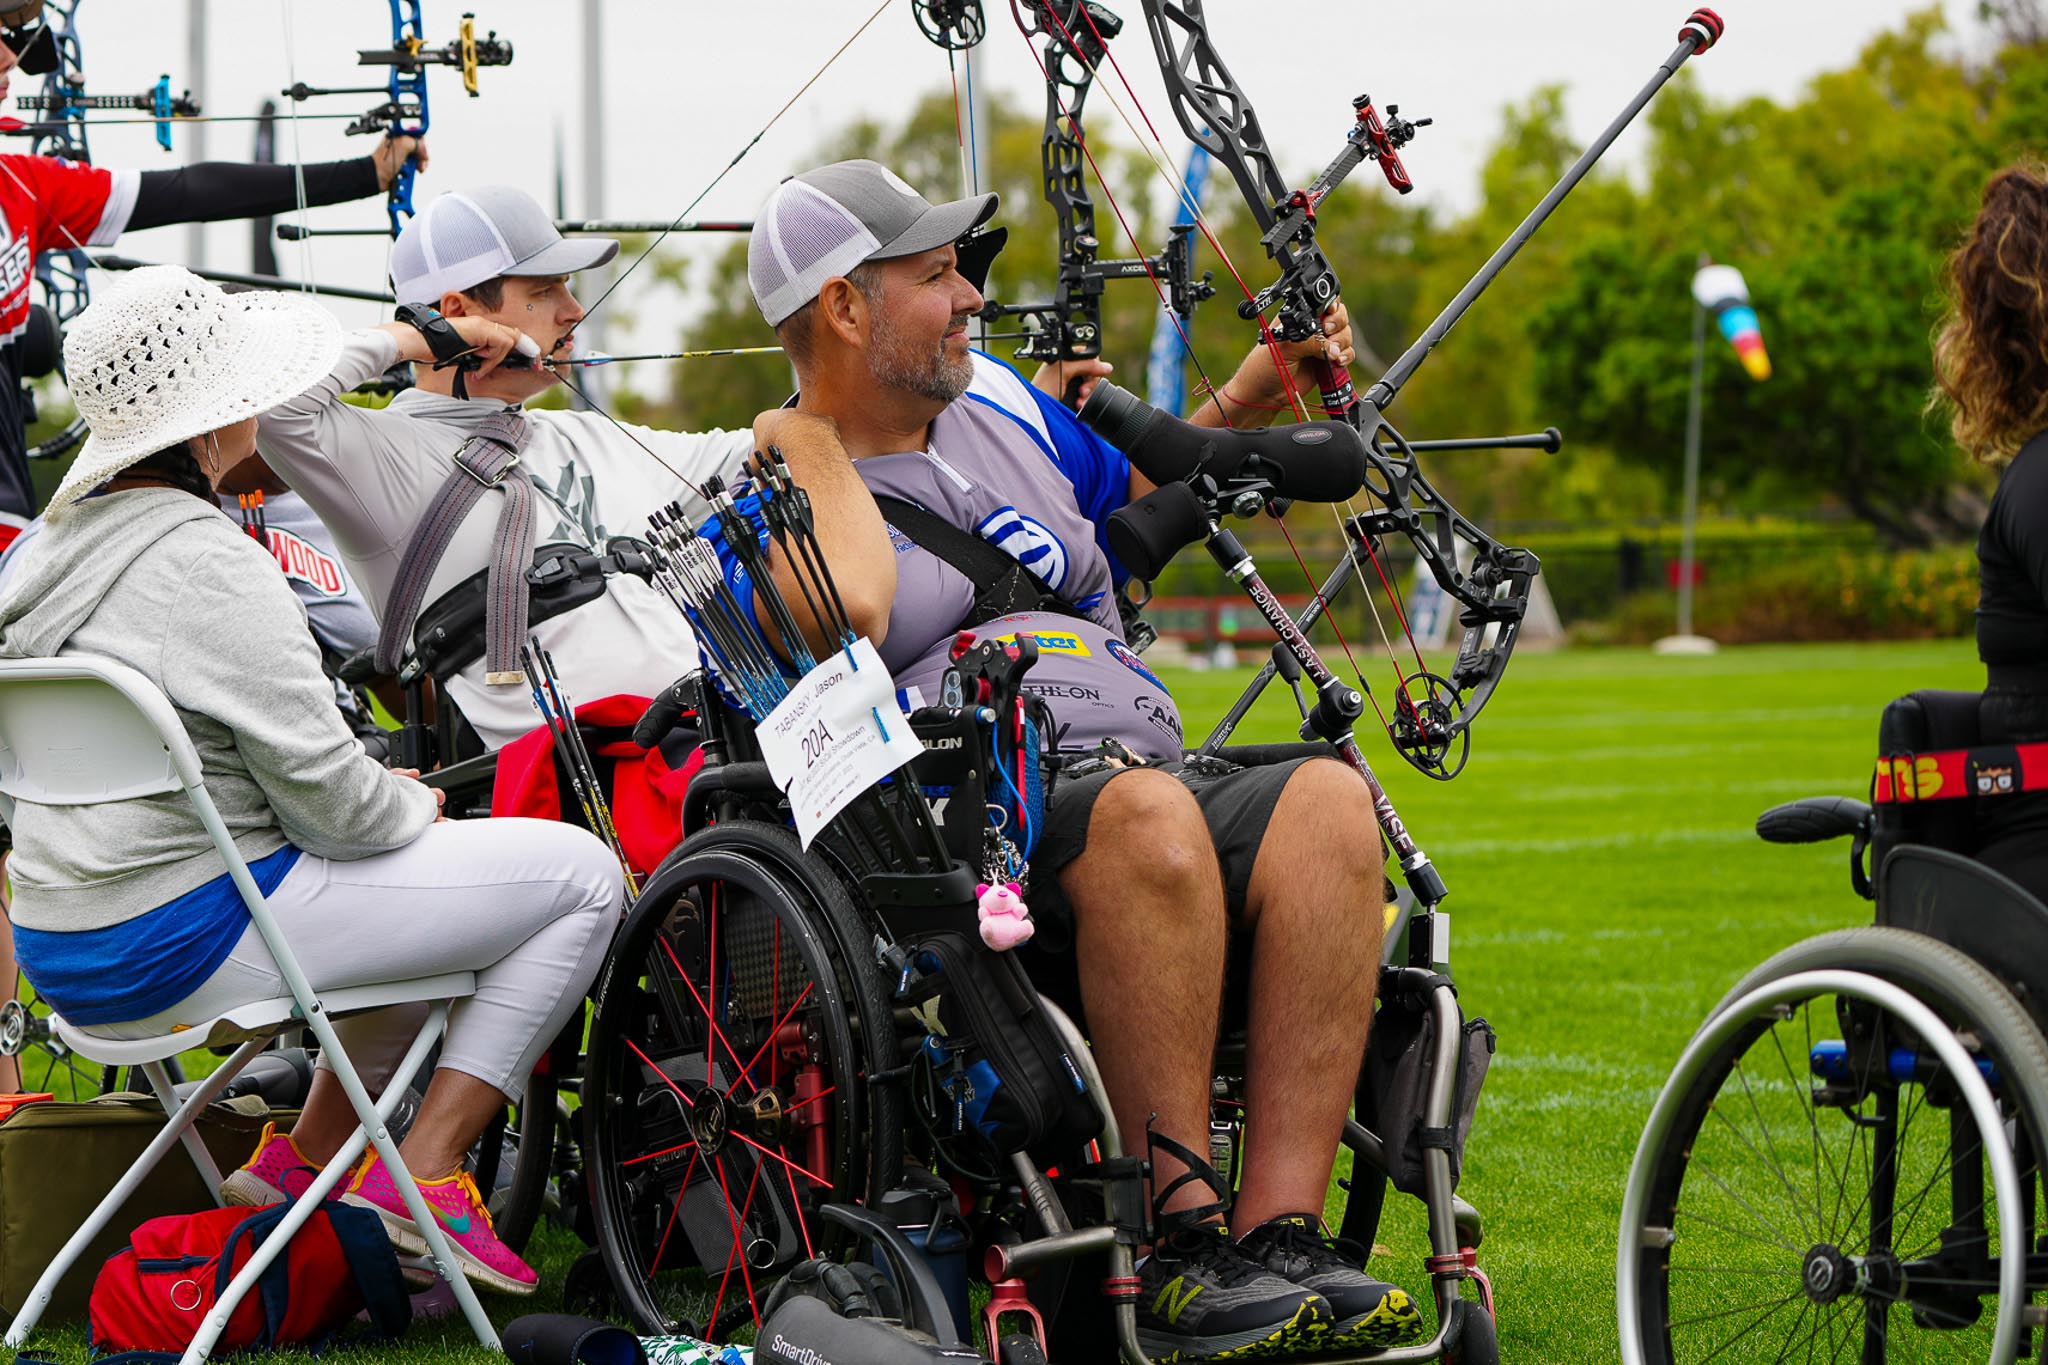 USA Archery announces the results of the Board of Directors elections